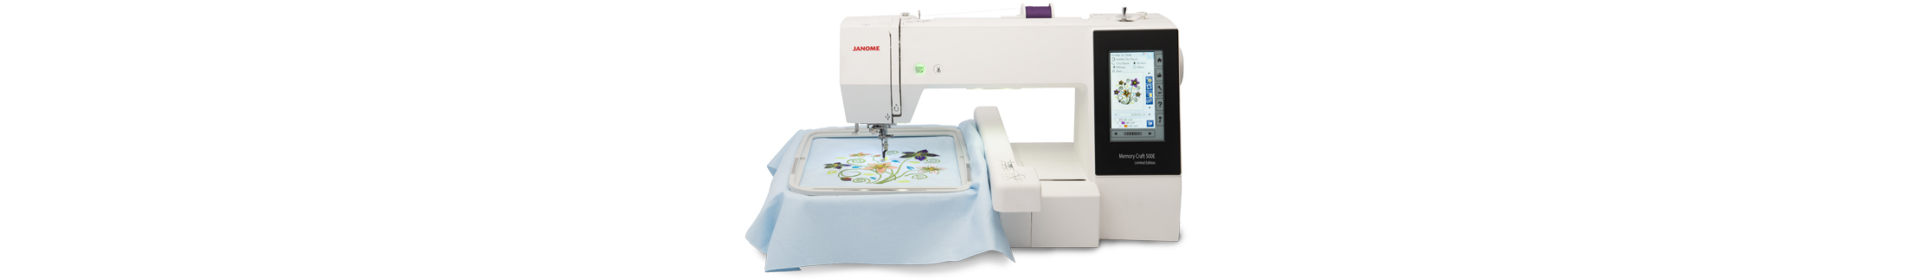 Janome 500e Limited Edition embroidery